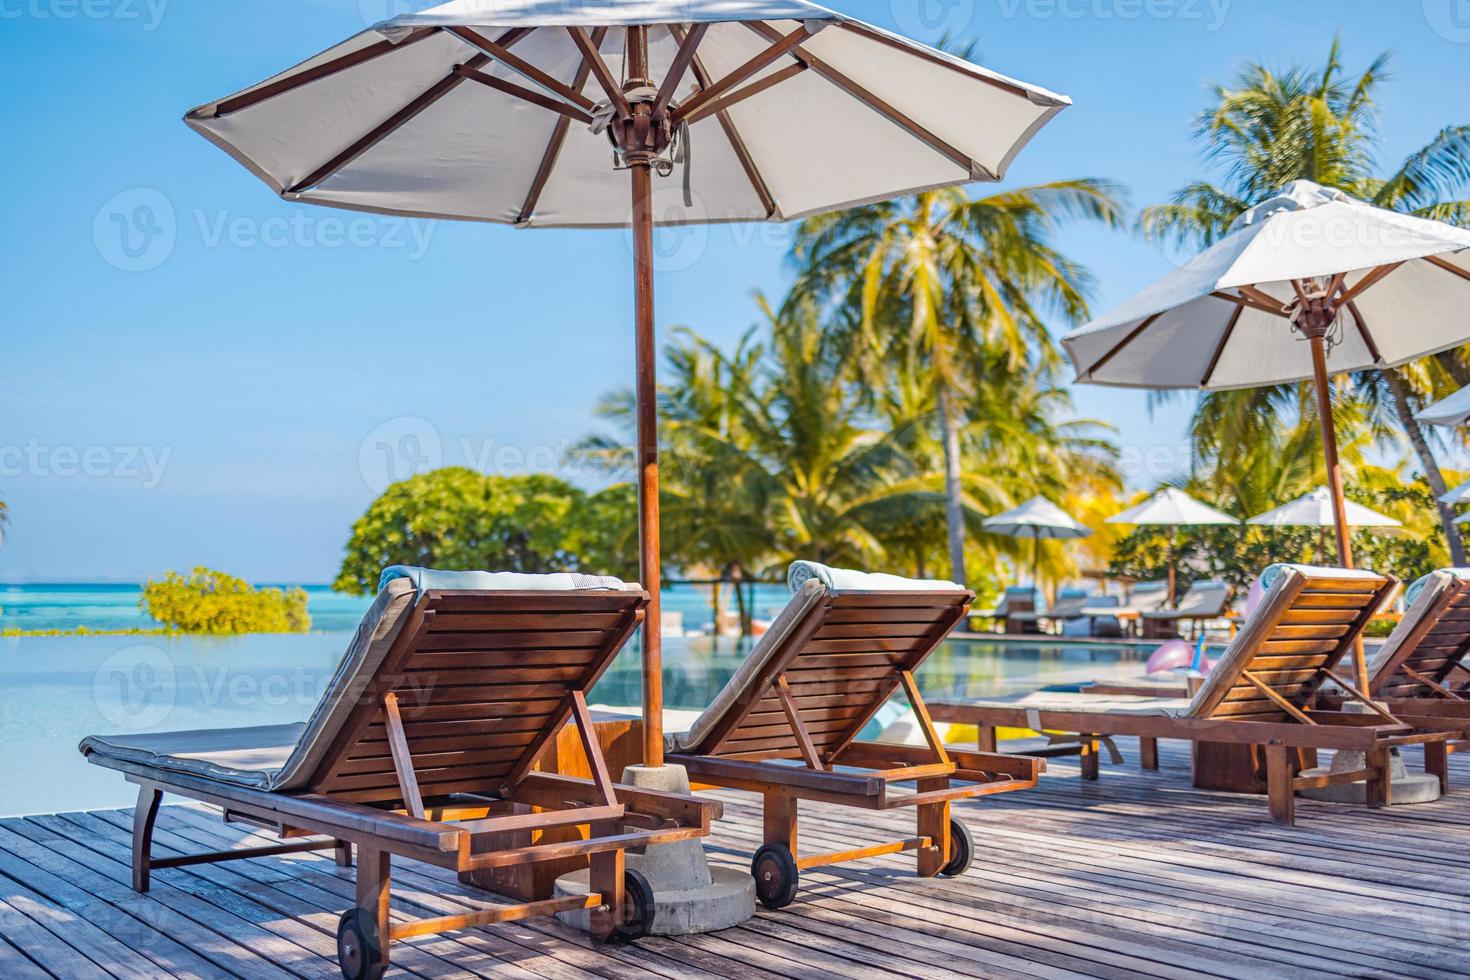 Umbrellas and chairs around outdoor swimming pool in resort hotel for vacation leisure lifestyle. Luxury destination concept, lounge closeup scenic under palm trees, relax, tranquil vibes photo